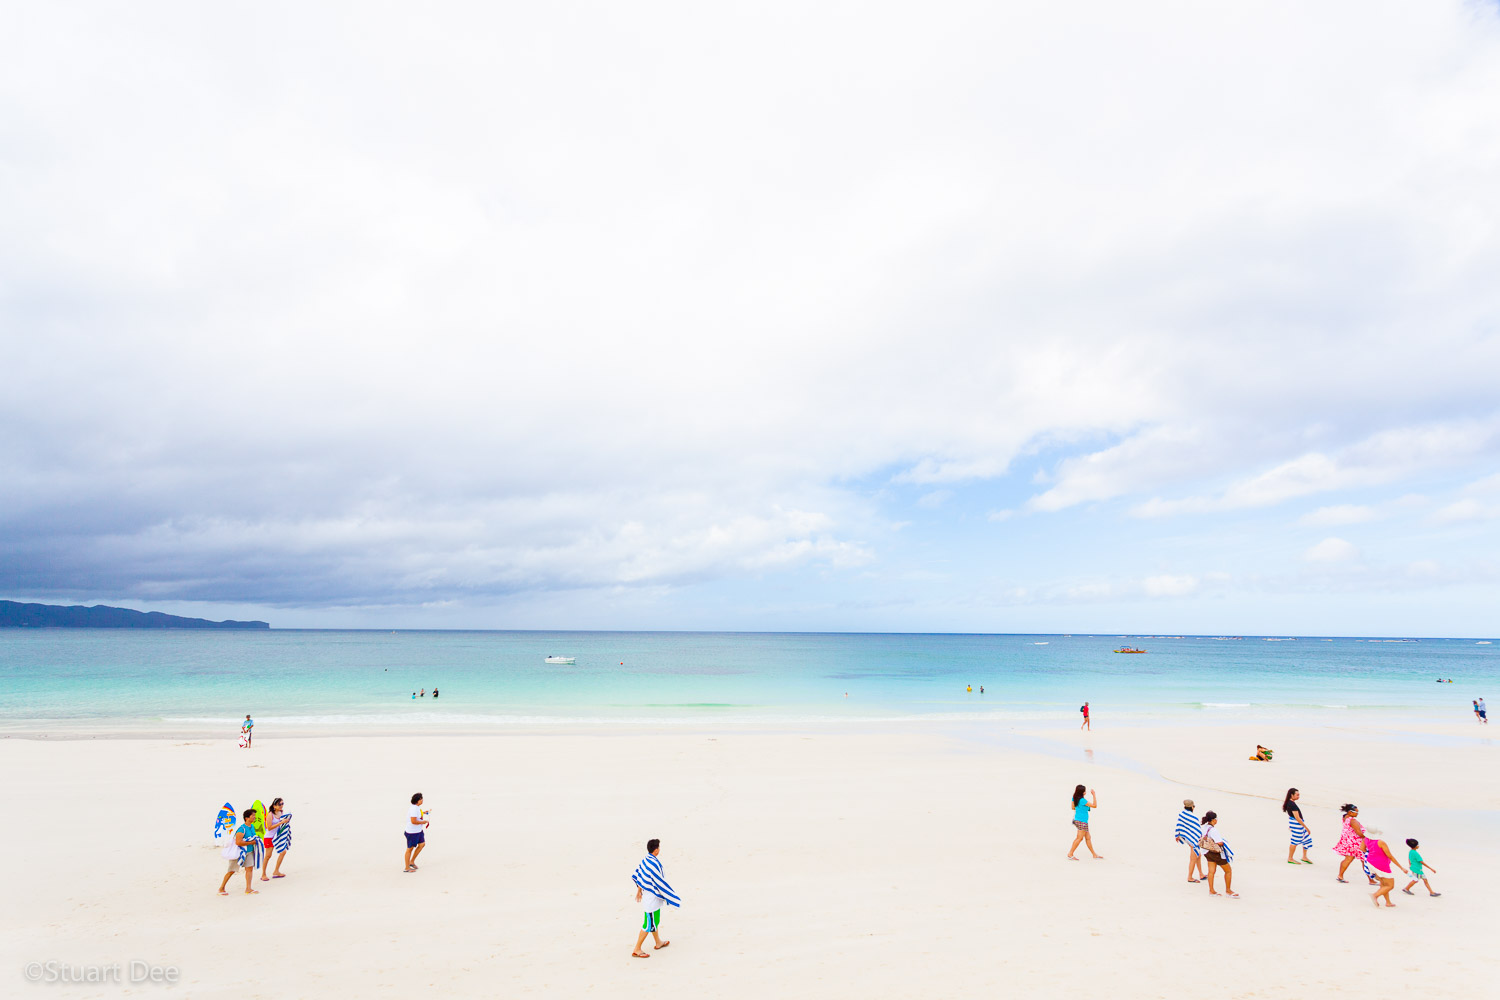  Boracay, Malay, Aklan, Philippines. Boracay is rated as one of the top beaches/islands in the world. 